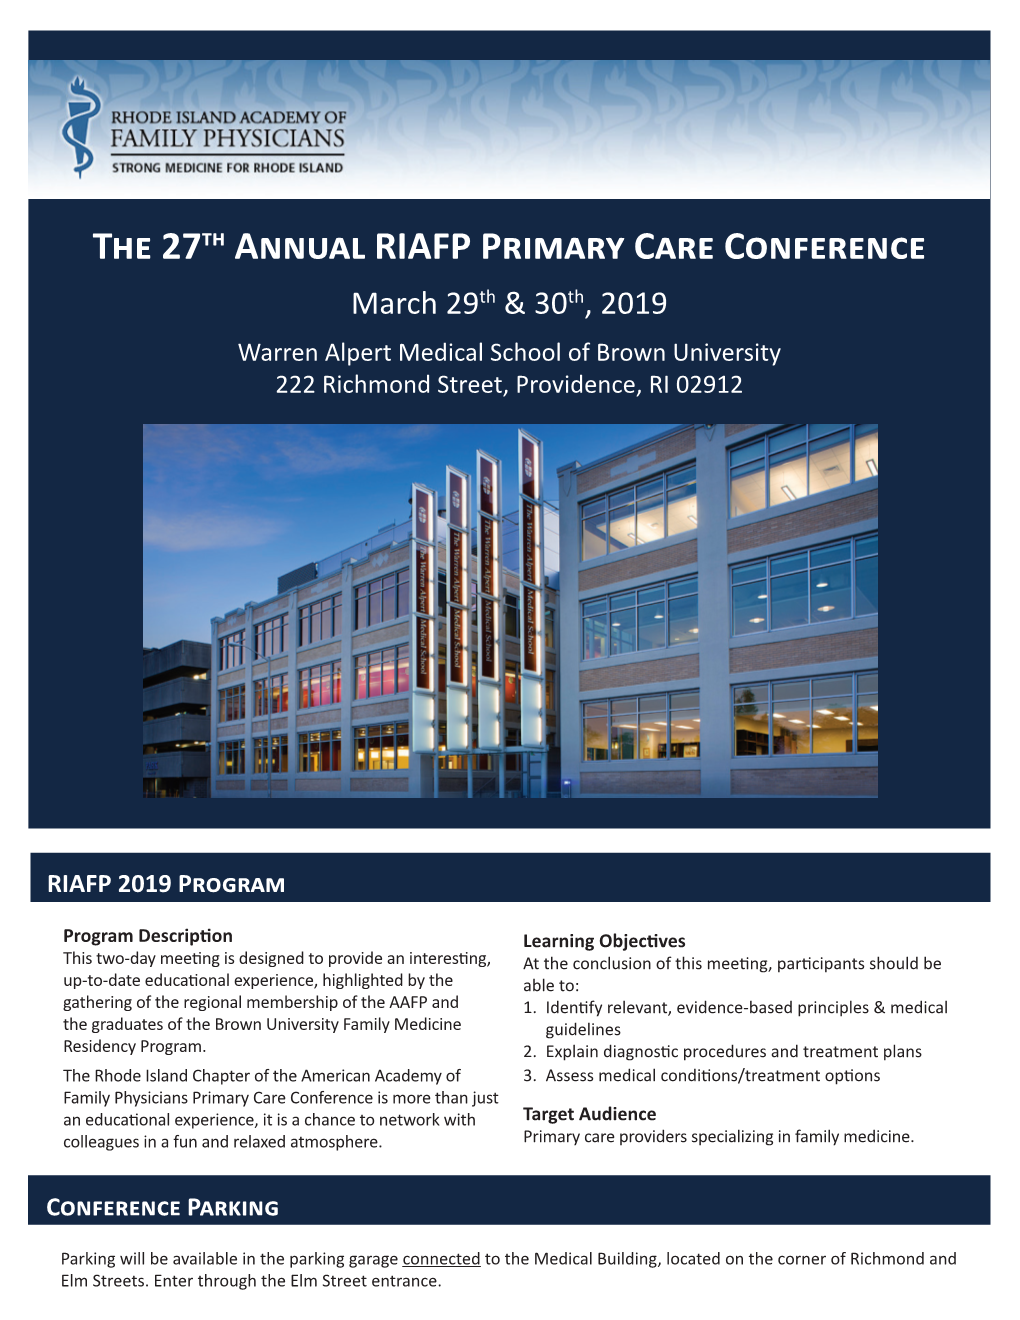 The 27Th Annual RIAFP Primary Care Conference March 29Th & 30Th, 2019 Warren Alpert Medical School of Brown University 222 Richmond Street, Providence, RI 02912